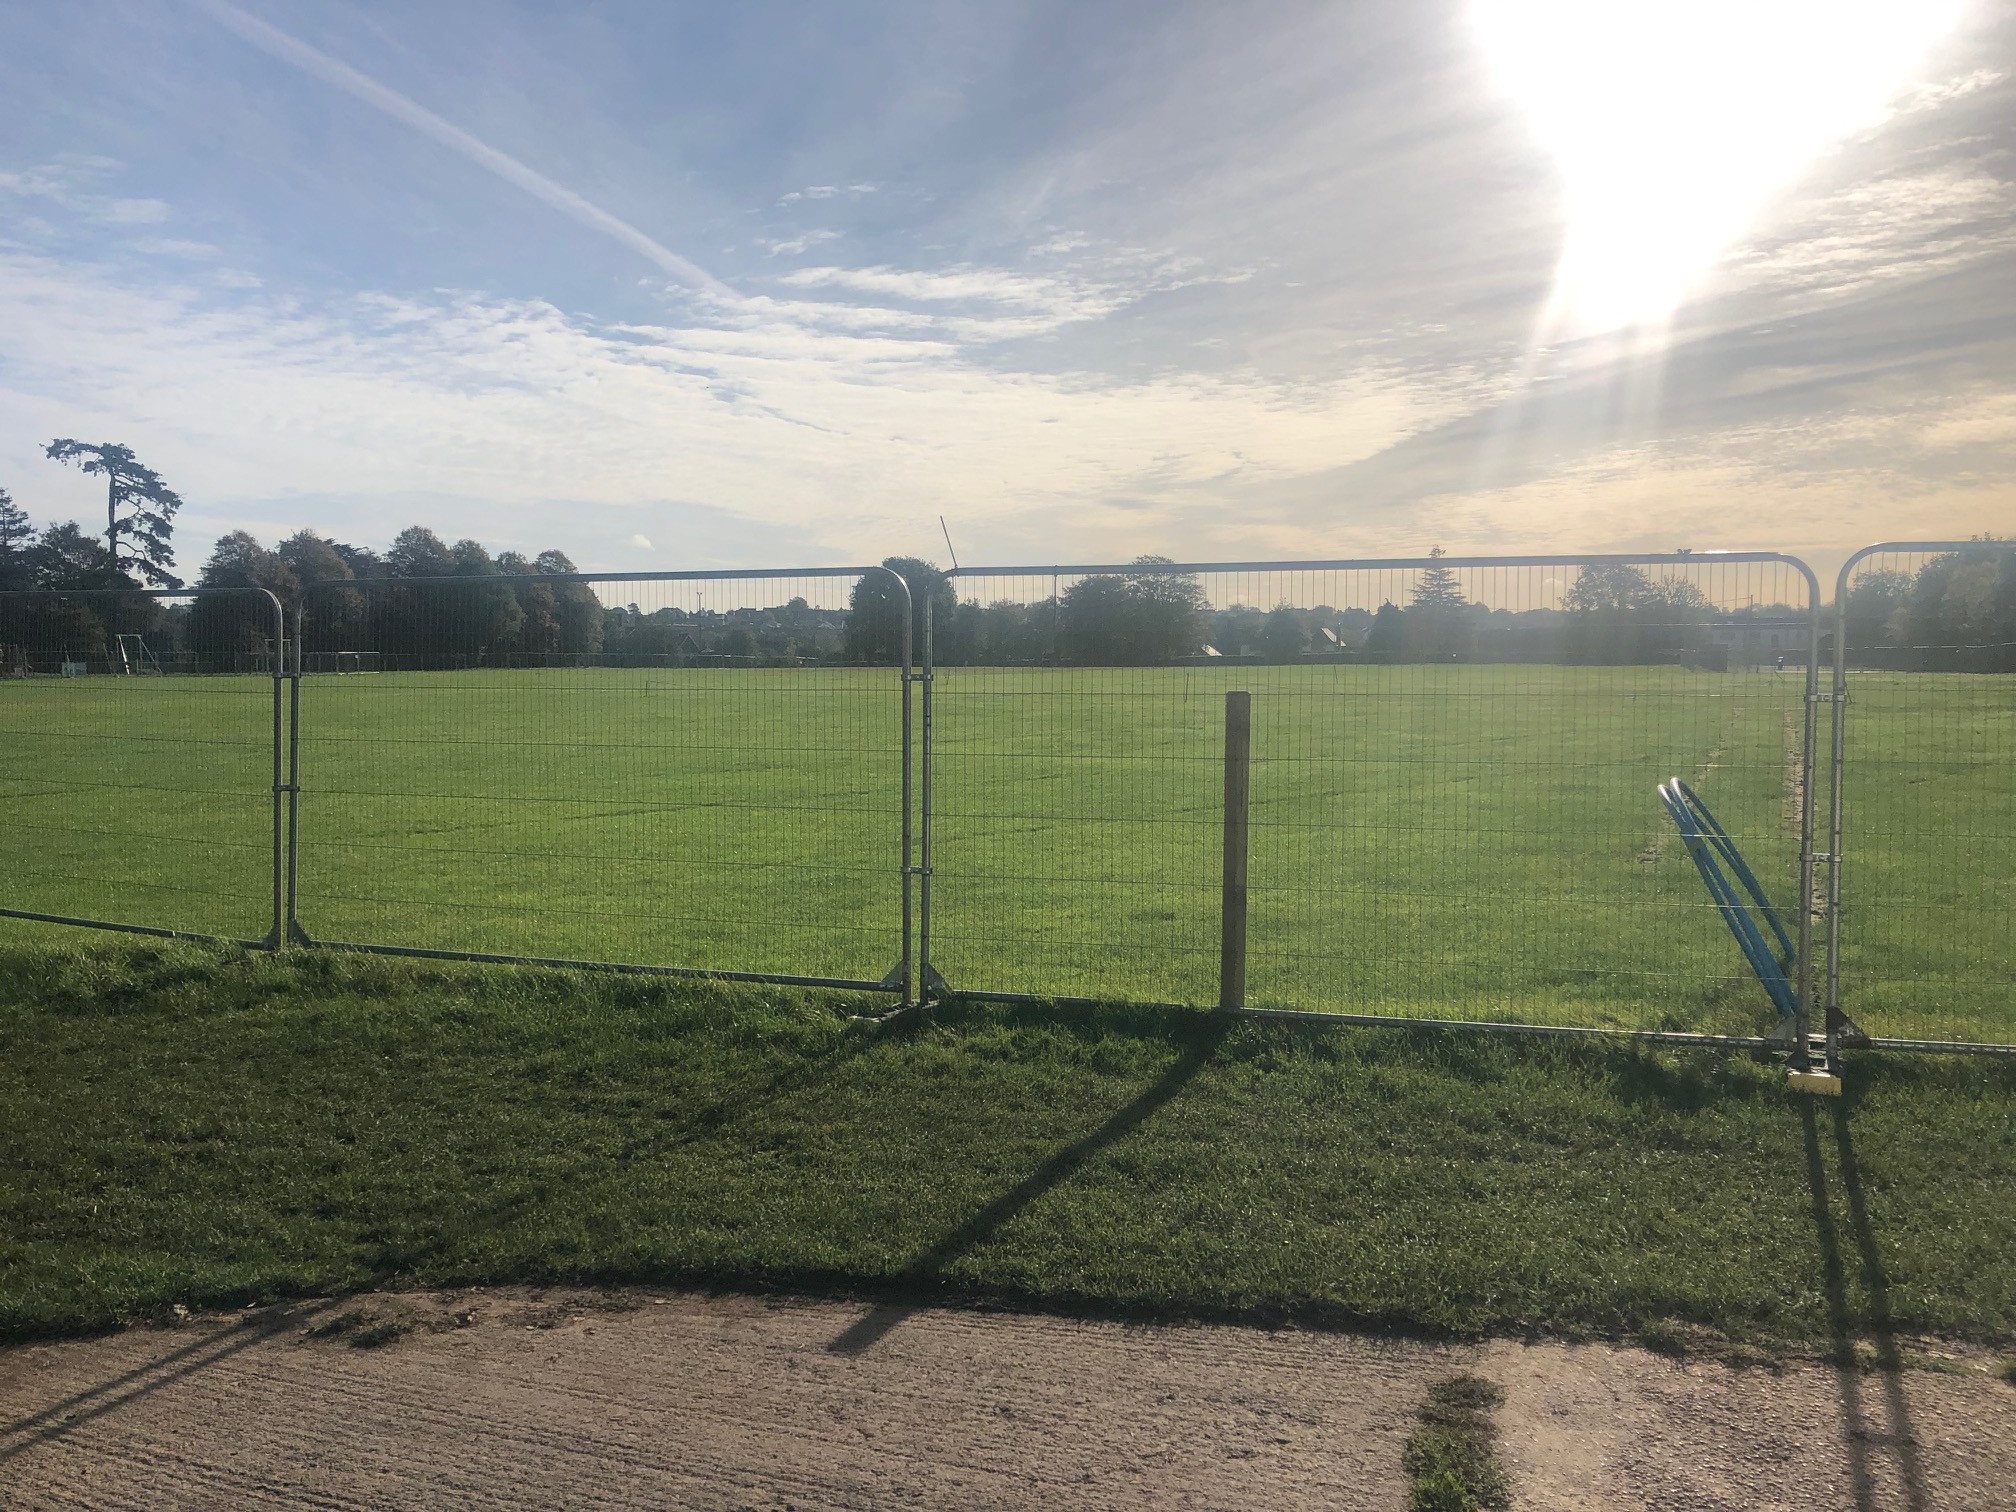 Fencing at The Park – Update